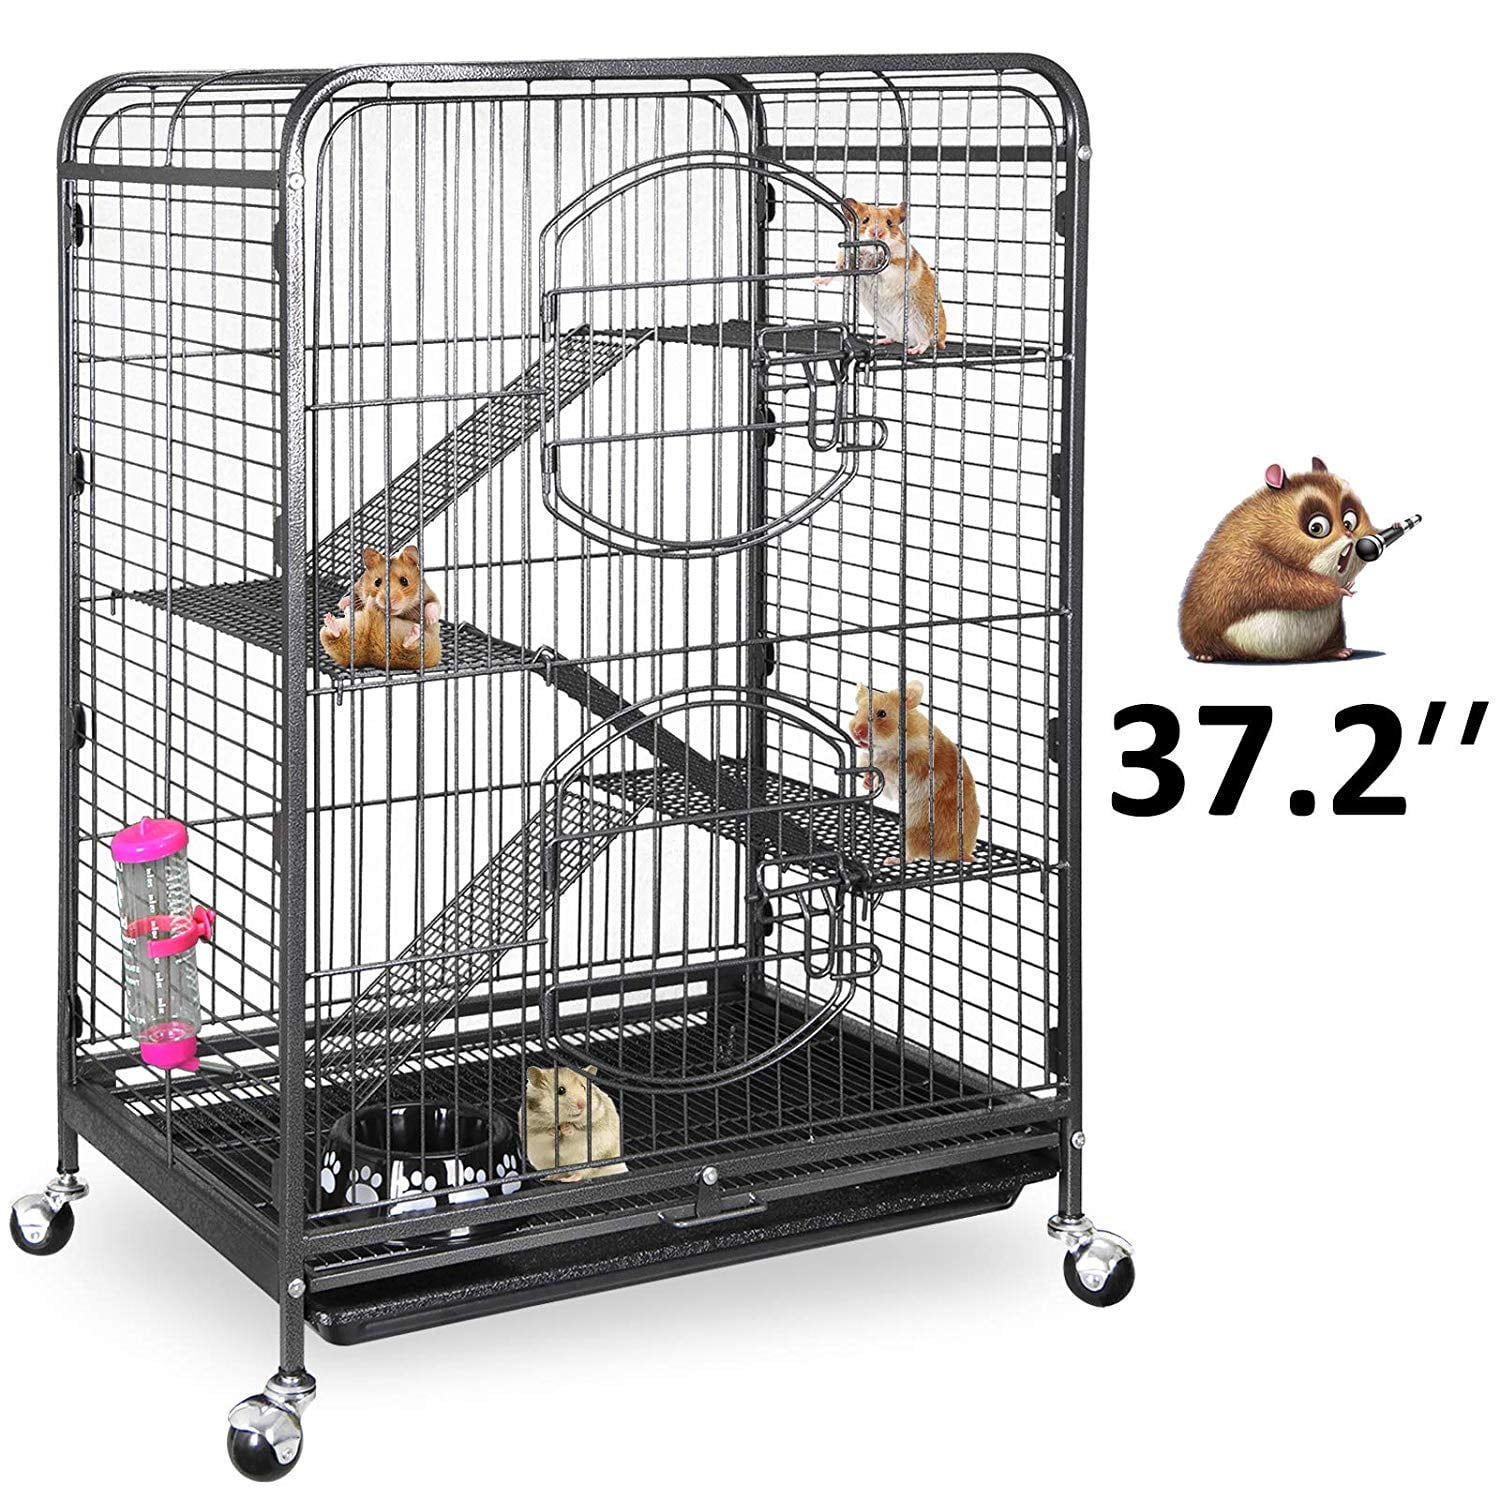 New Homey Pet Small Animals Guinea Pig Chinchilla Ferret Cage Crate House w Tray 